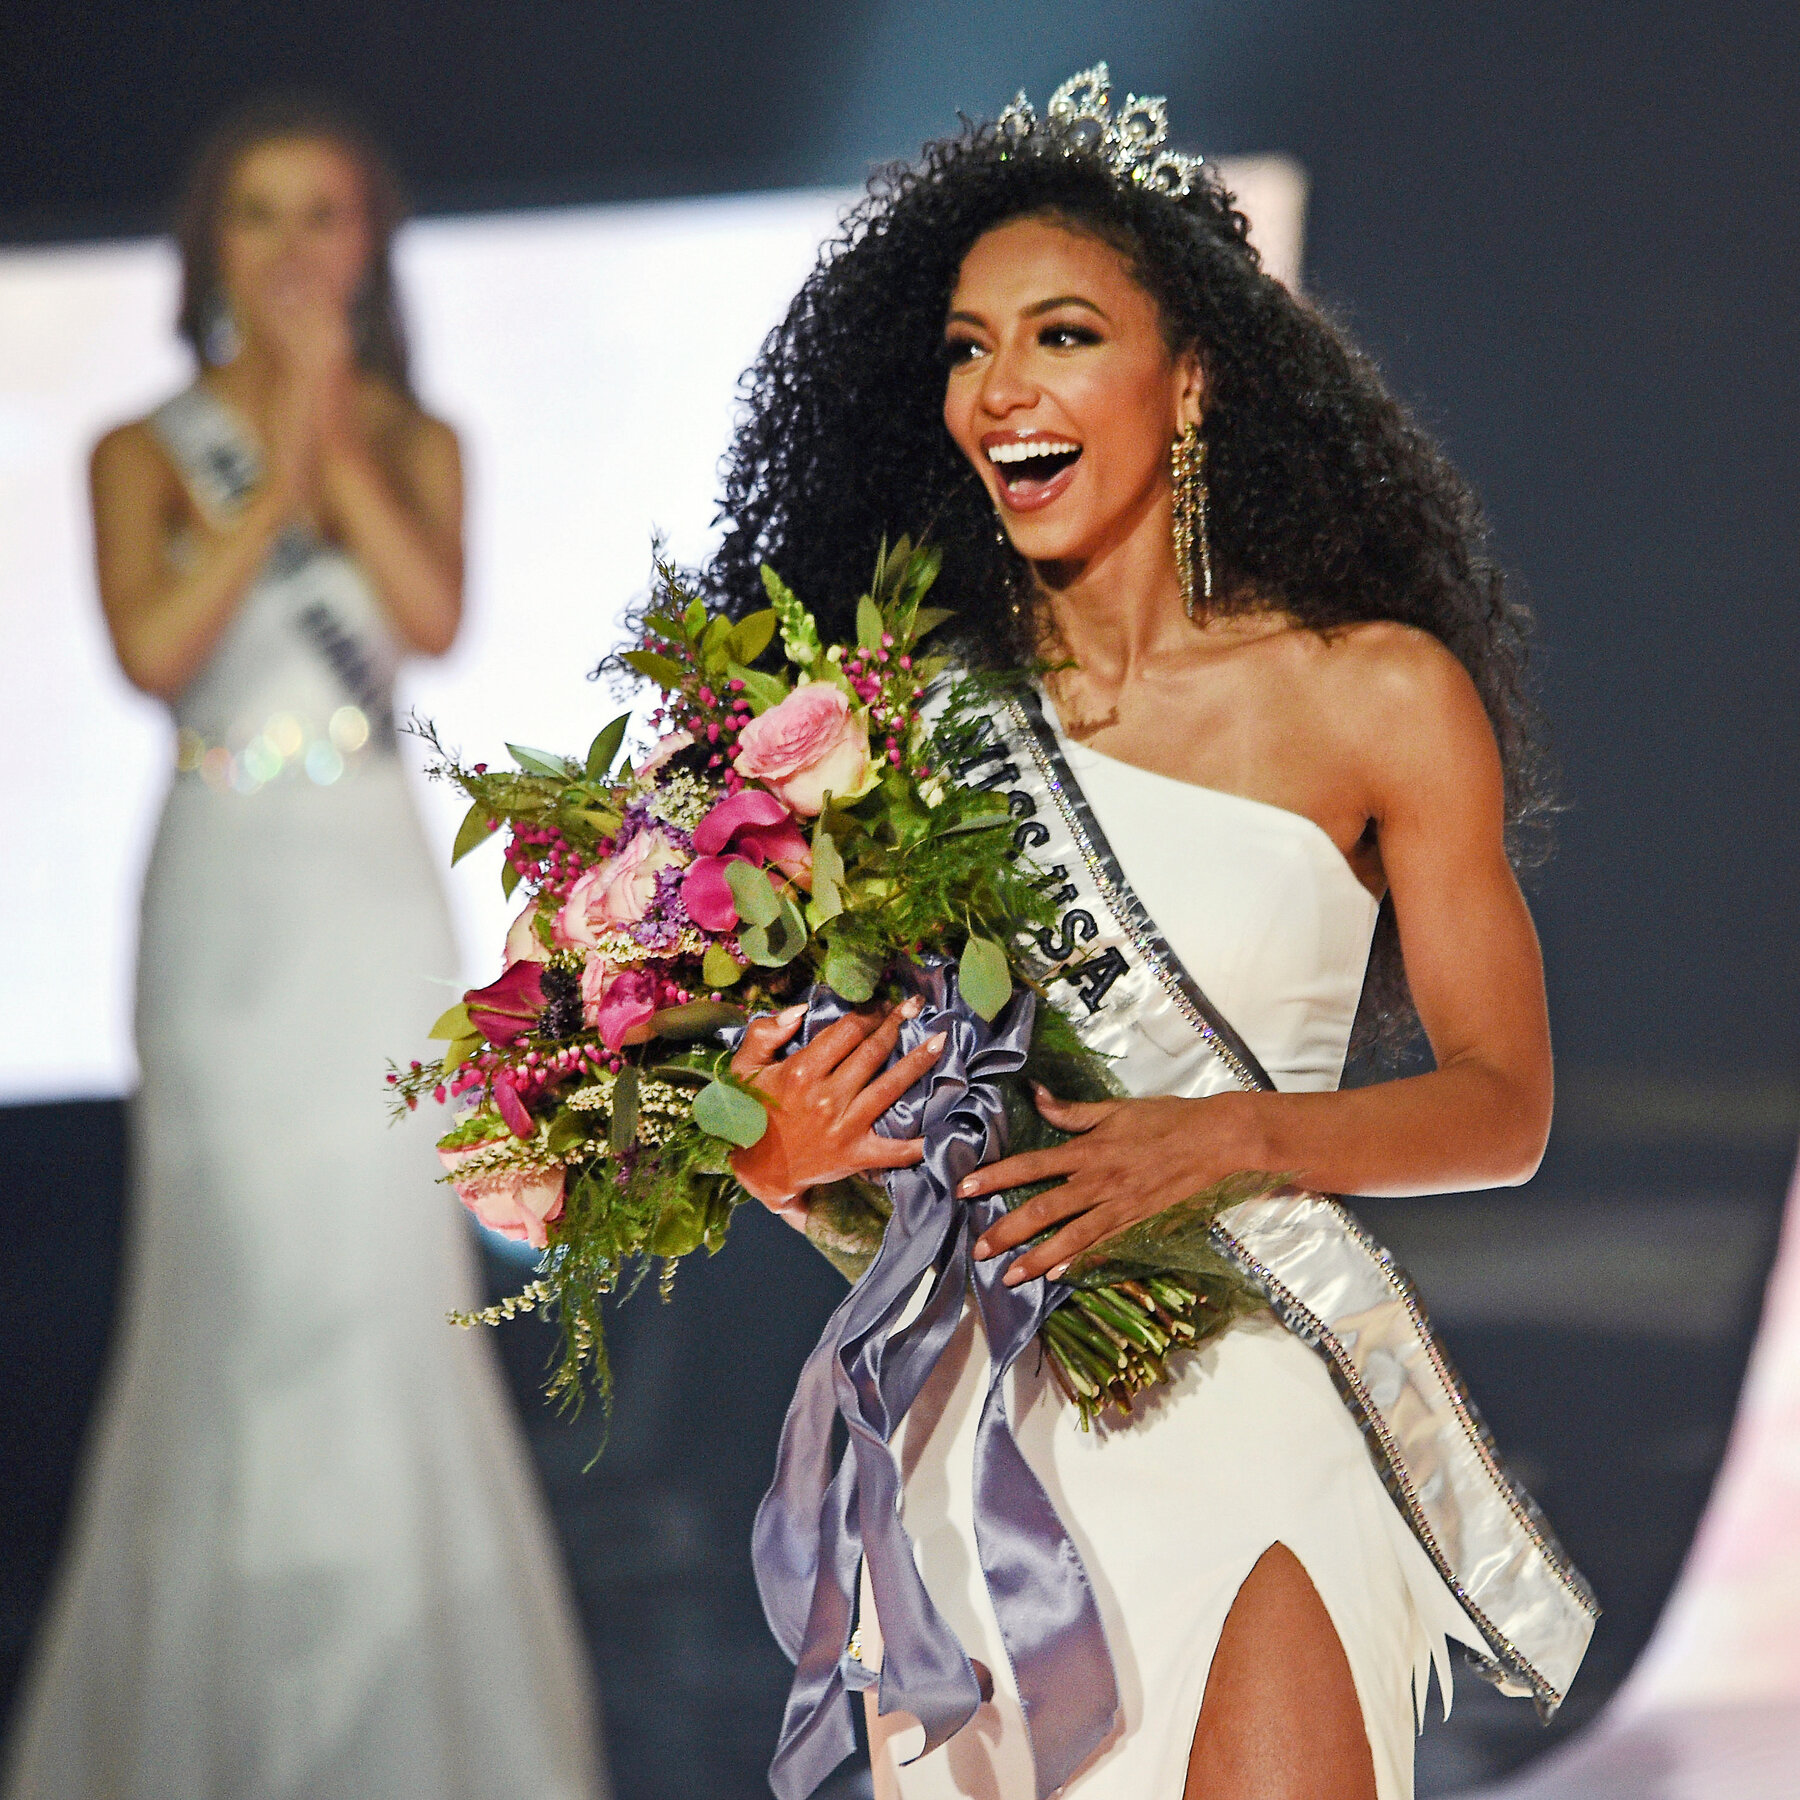 Cause of Death formally Confirmed for Miss USA 2019 Cheslie Kryst